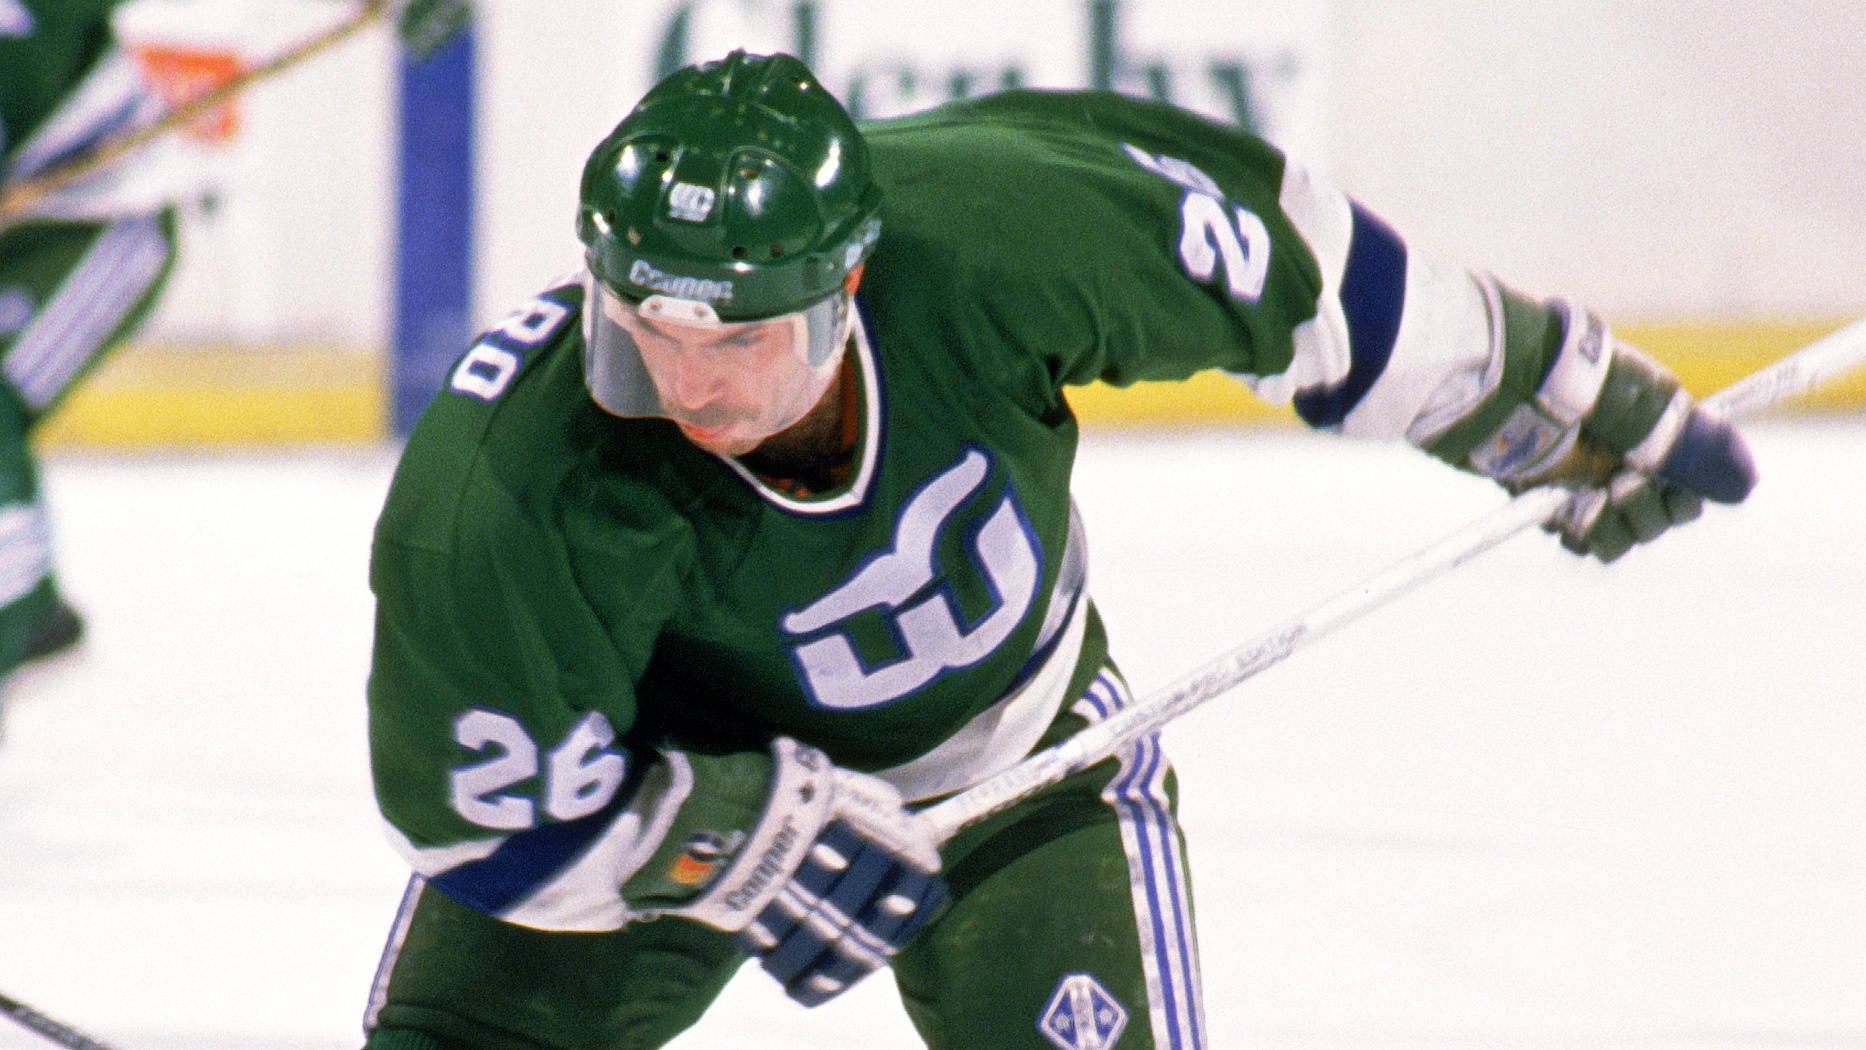 whalers jersey hurricanes